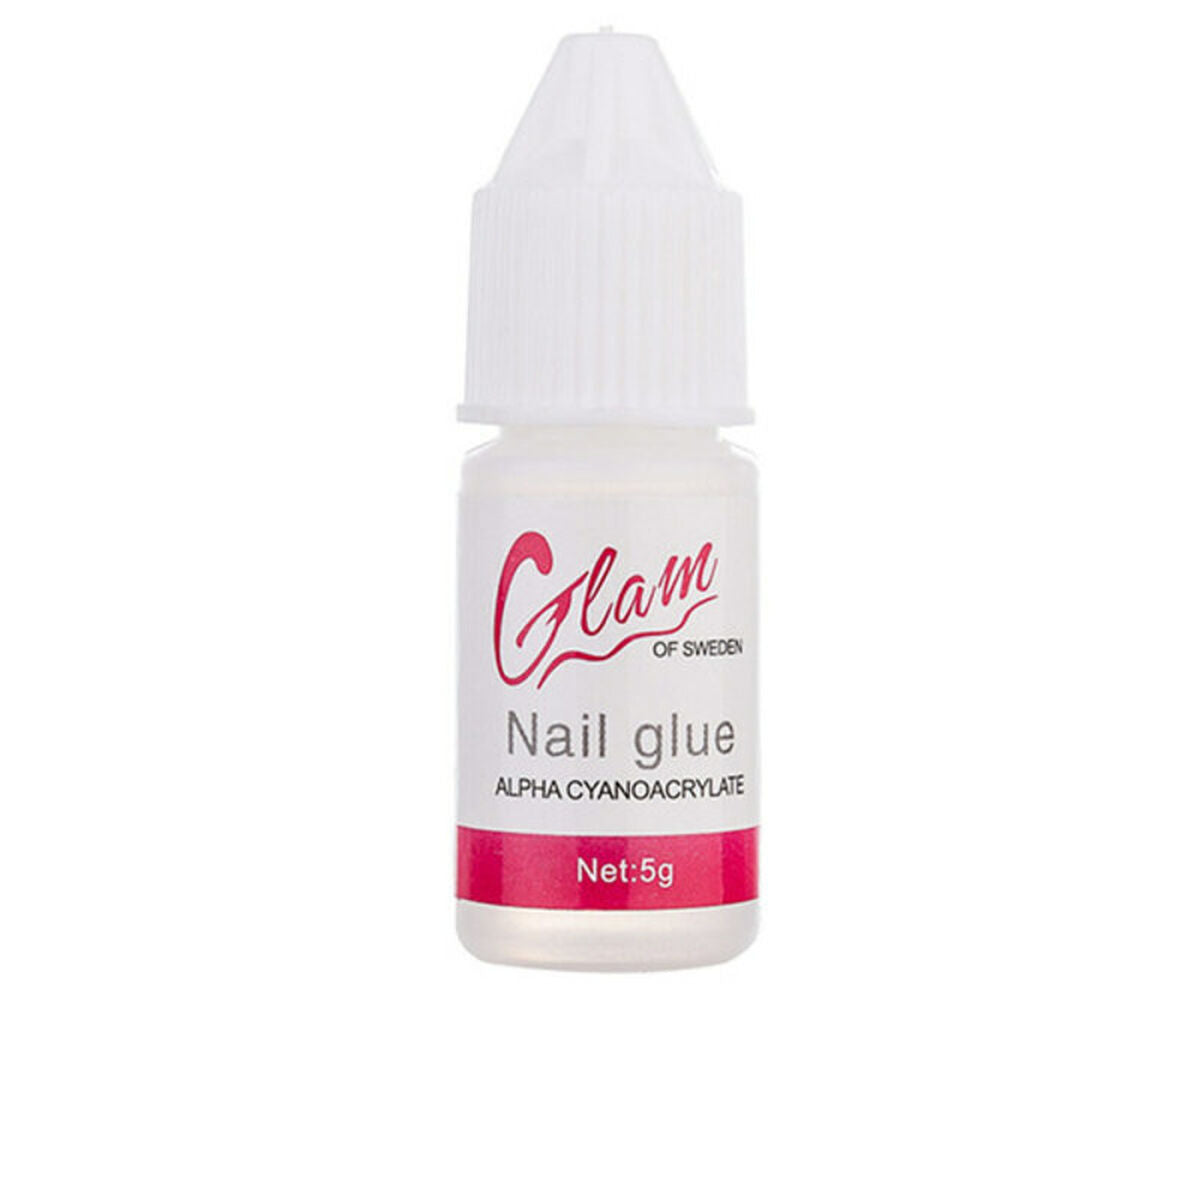 Gel glue Glam Of Sweden Nail - Calm Beauty IE